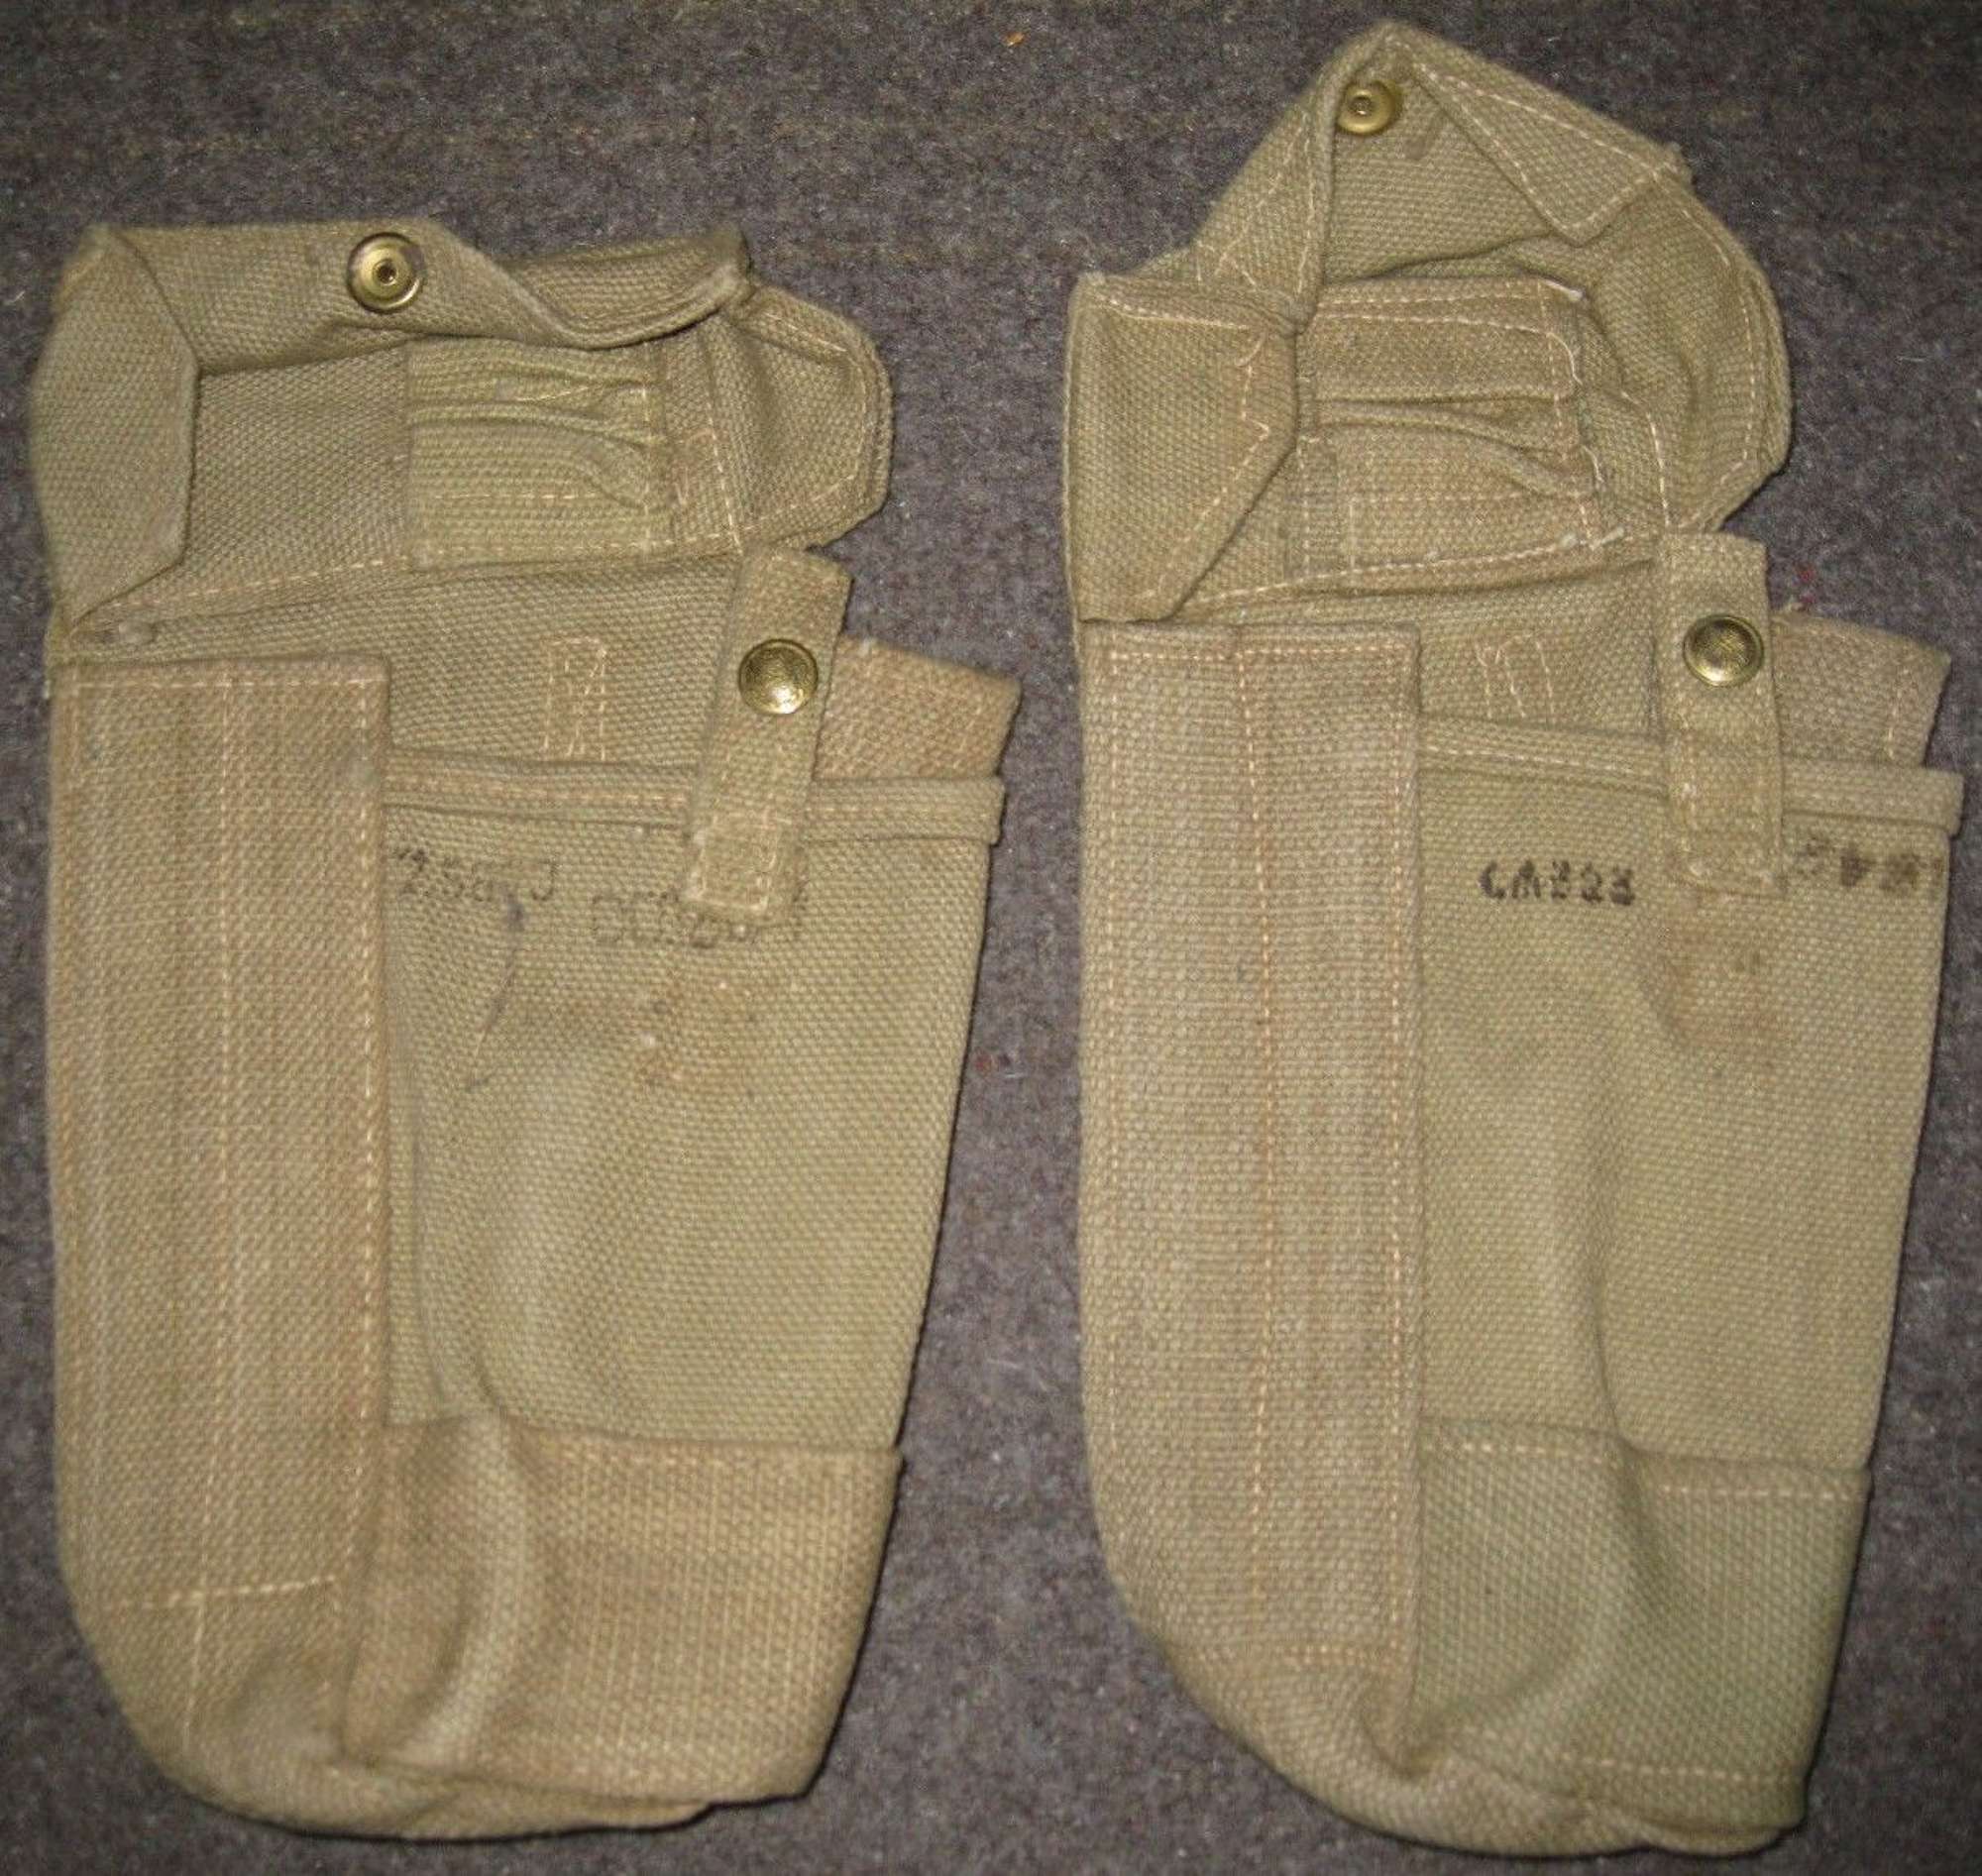 A GOOD MINT PAIR OF MADE 37 PATTERN WEBBING AMMO POUCHES MKII